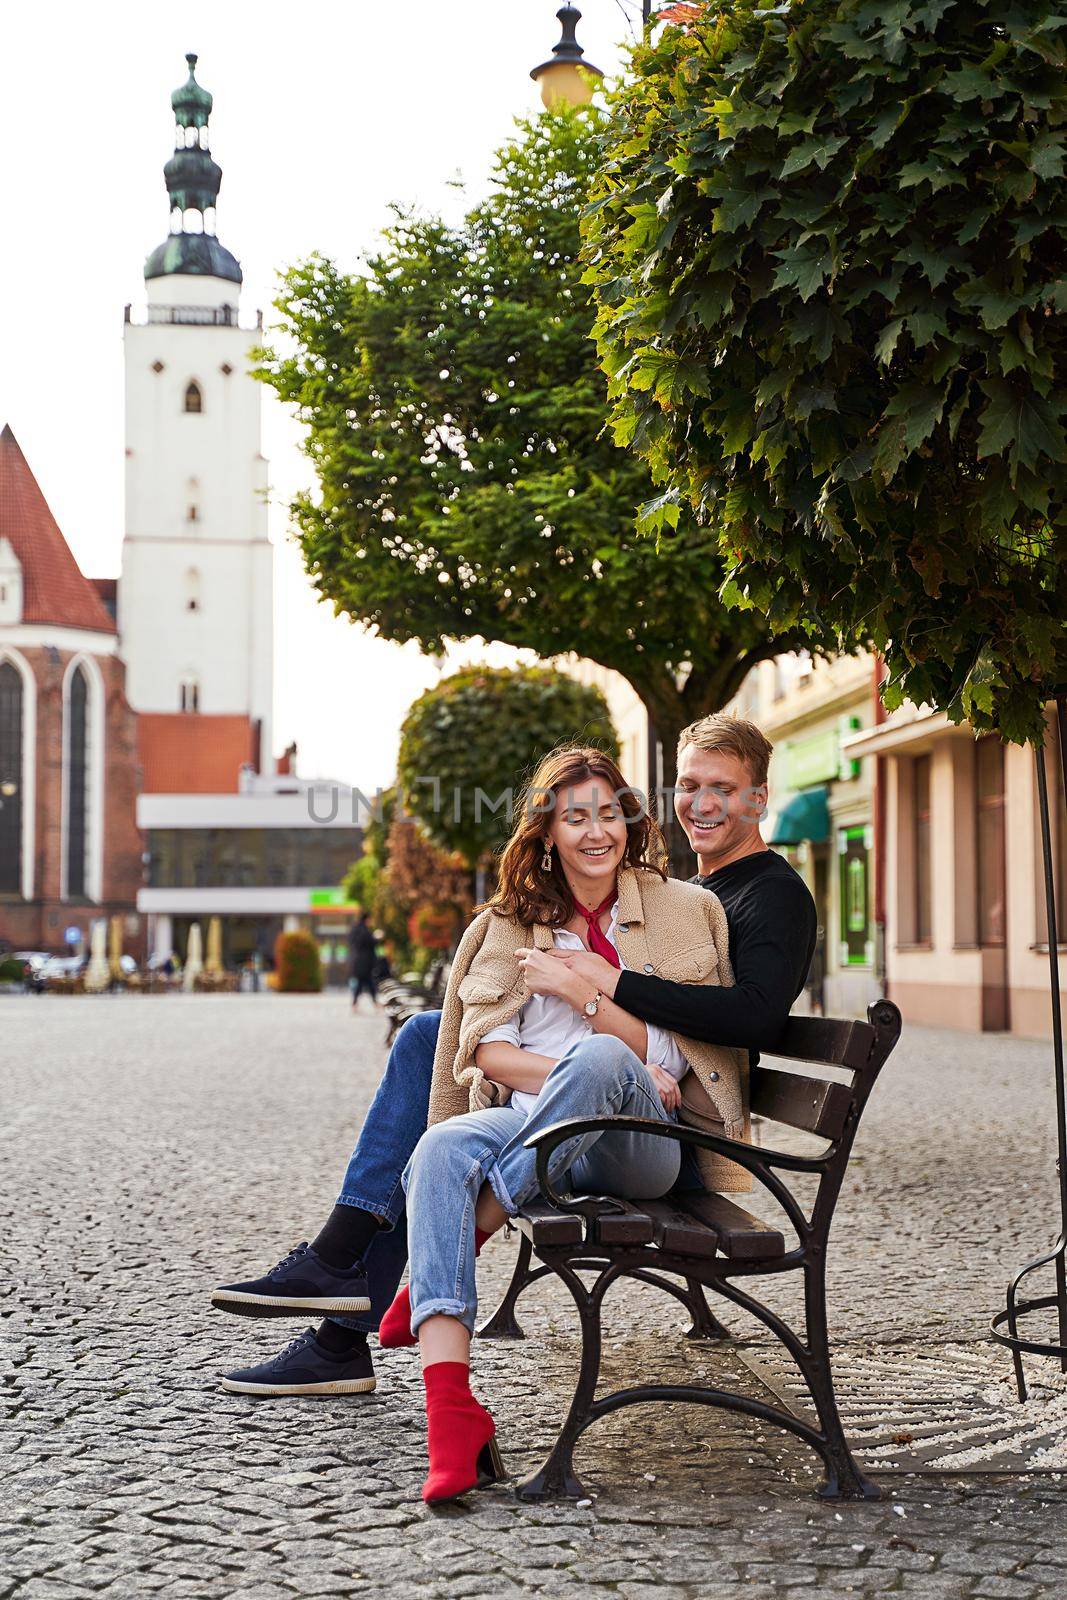 Beautiful young couple cuddling on a bench in a European town. Romatnic date and love concept. by berezko